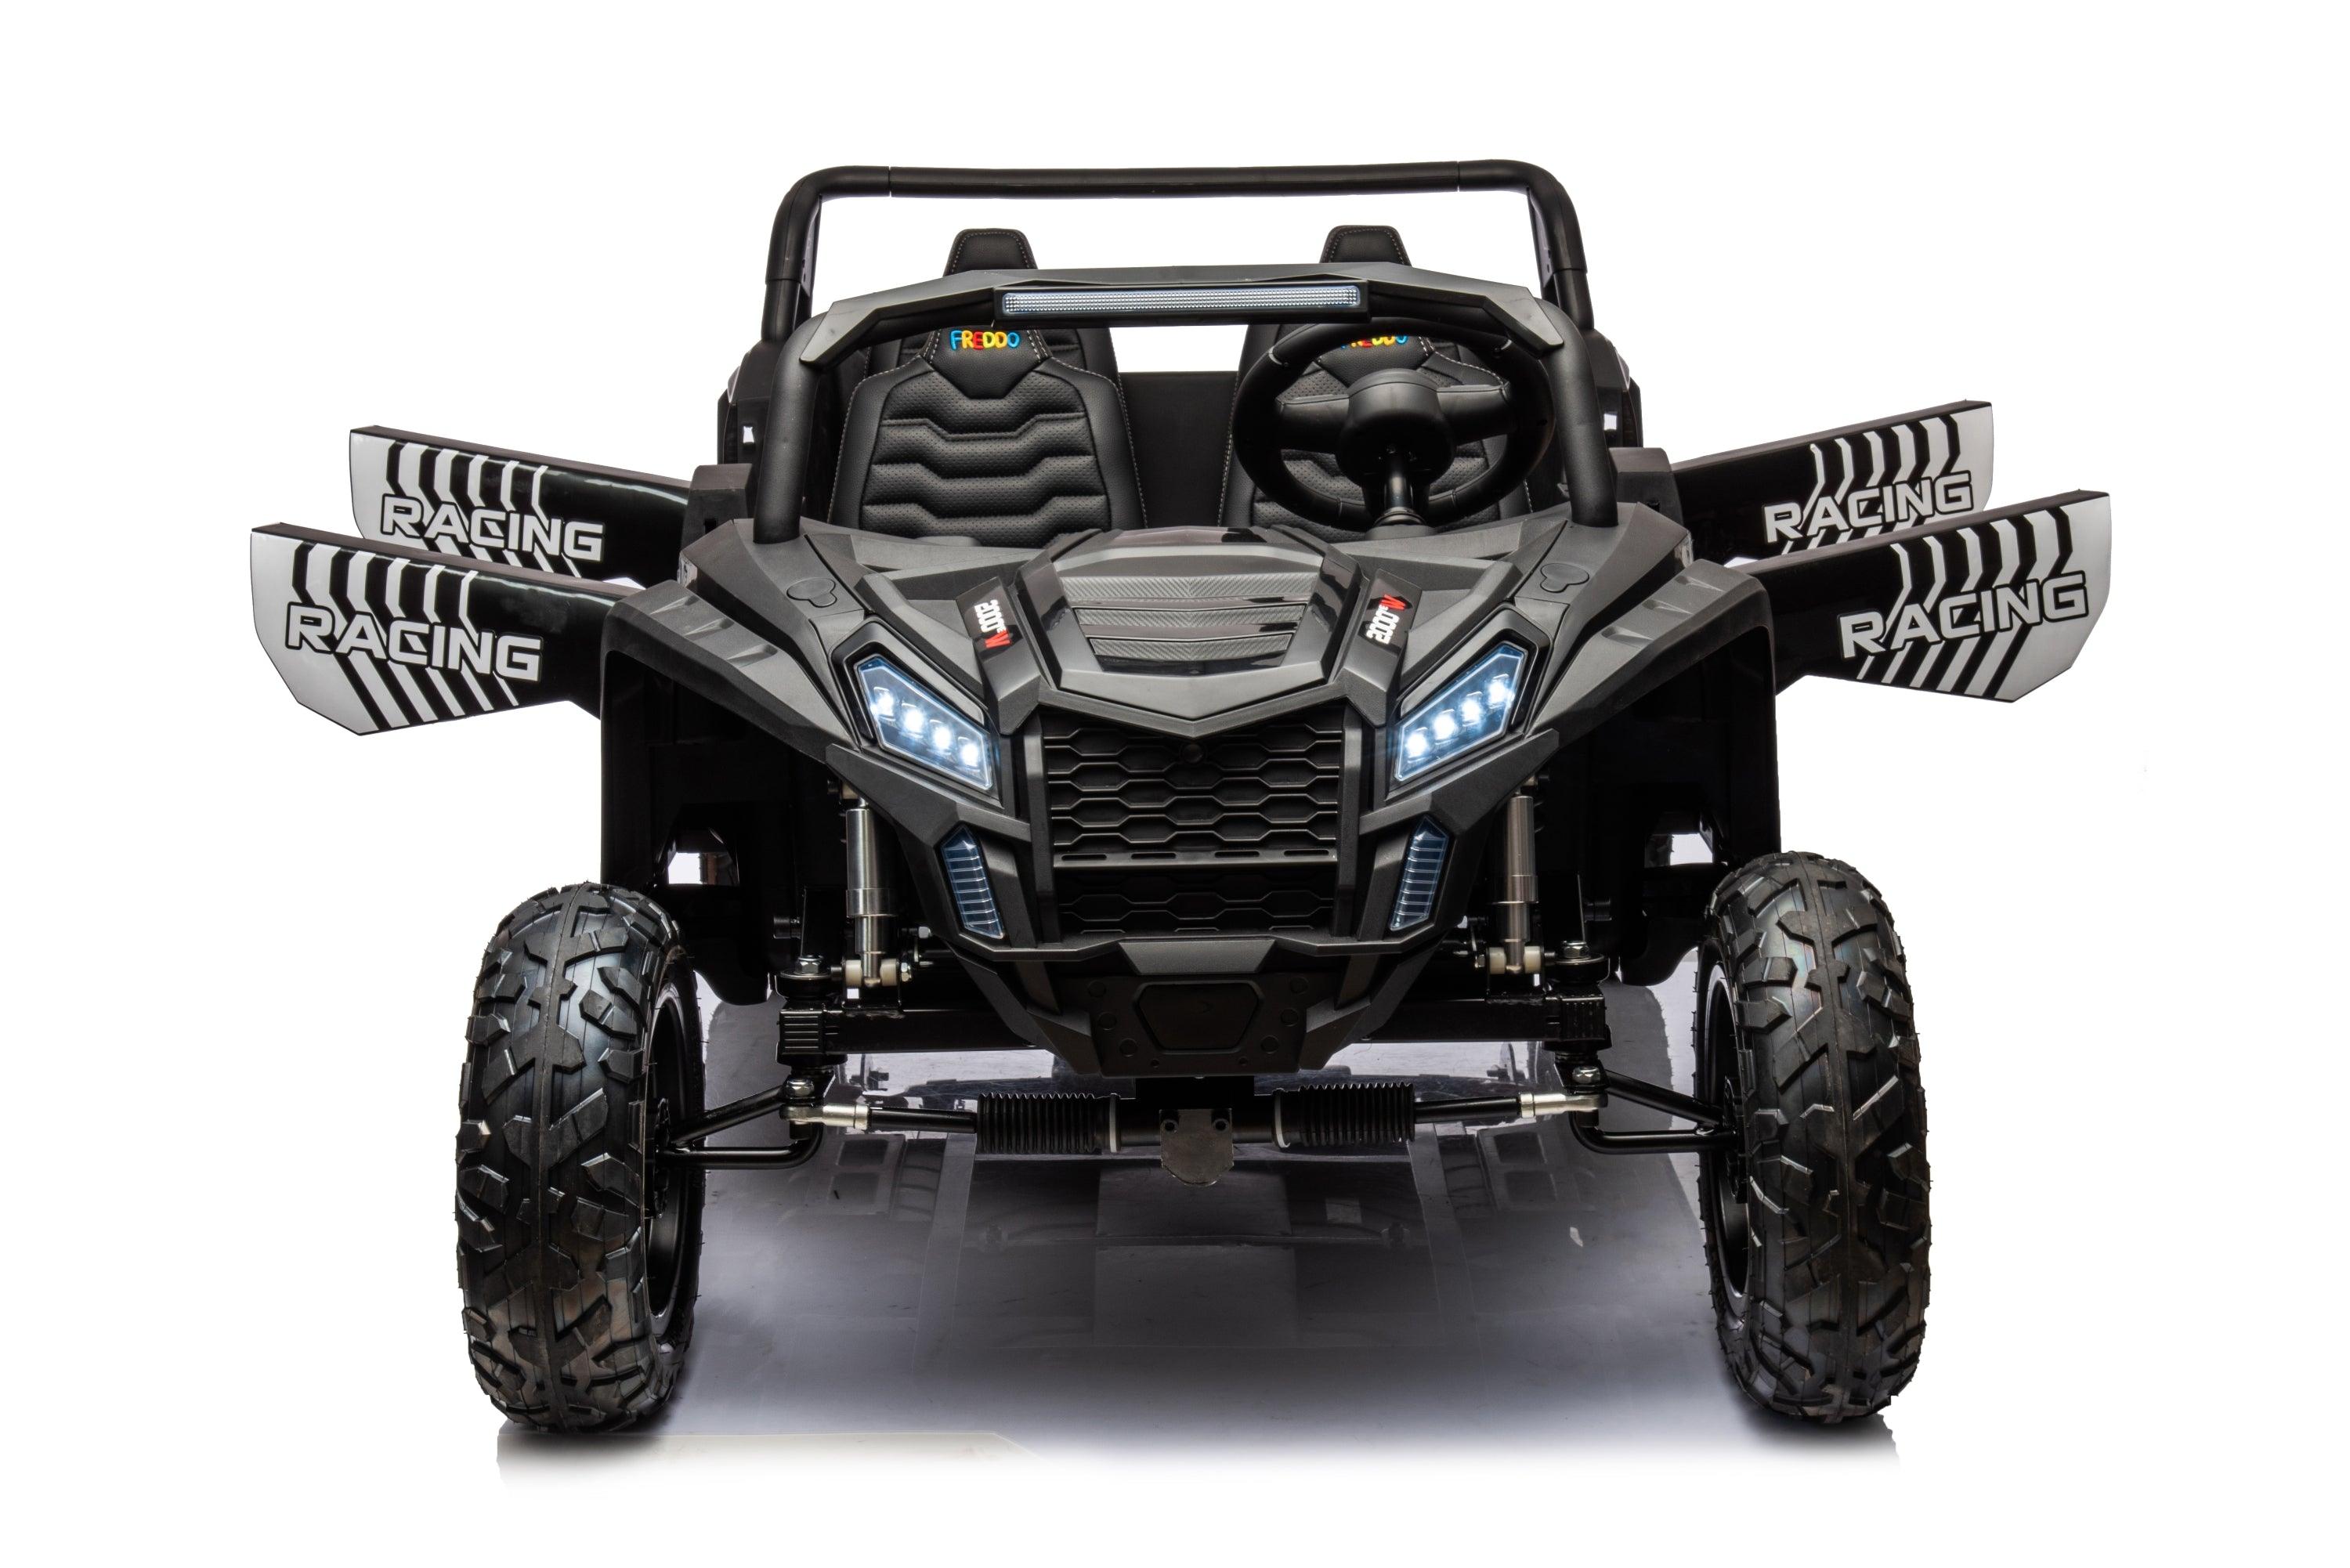 48V Freddo Beast XL: World's Fastest Kids' 4-Seater Dune Buggy with Advanced Brushless Motor & Precision Differential - DTI Direct Canada